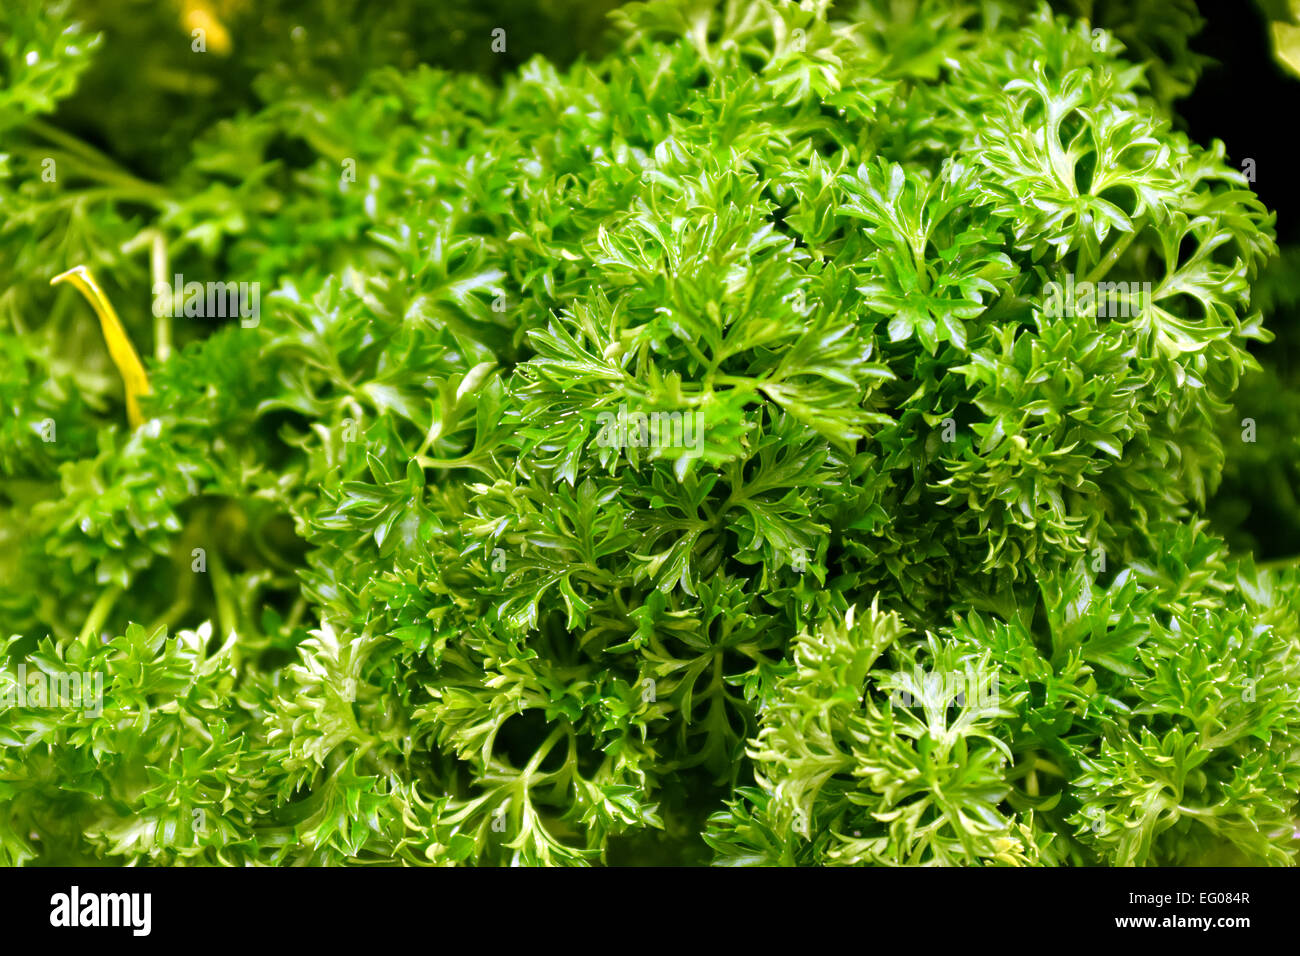 Lovely curly parsley, vegetable, were selected to be photographed Stock Photo